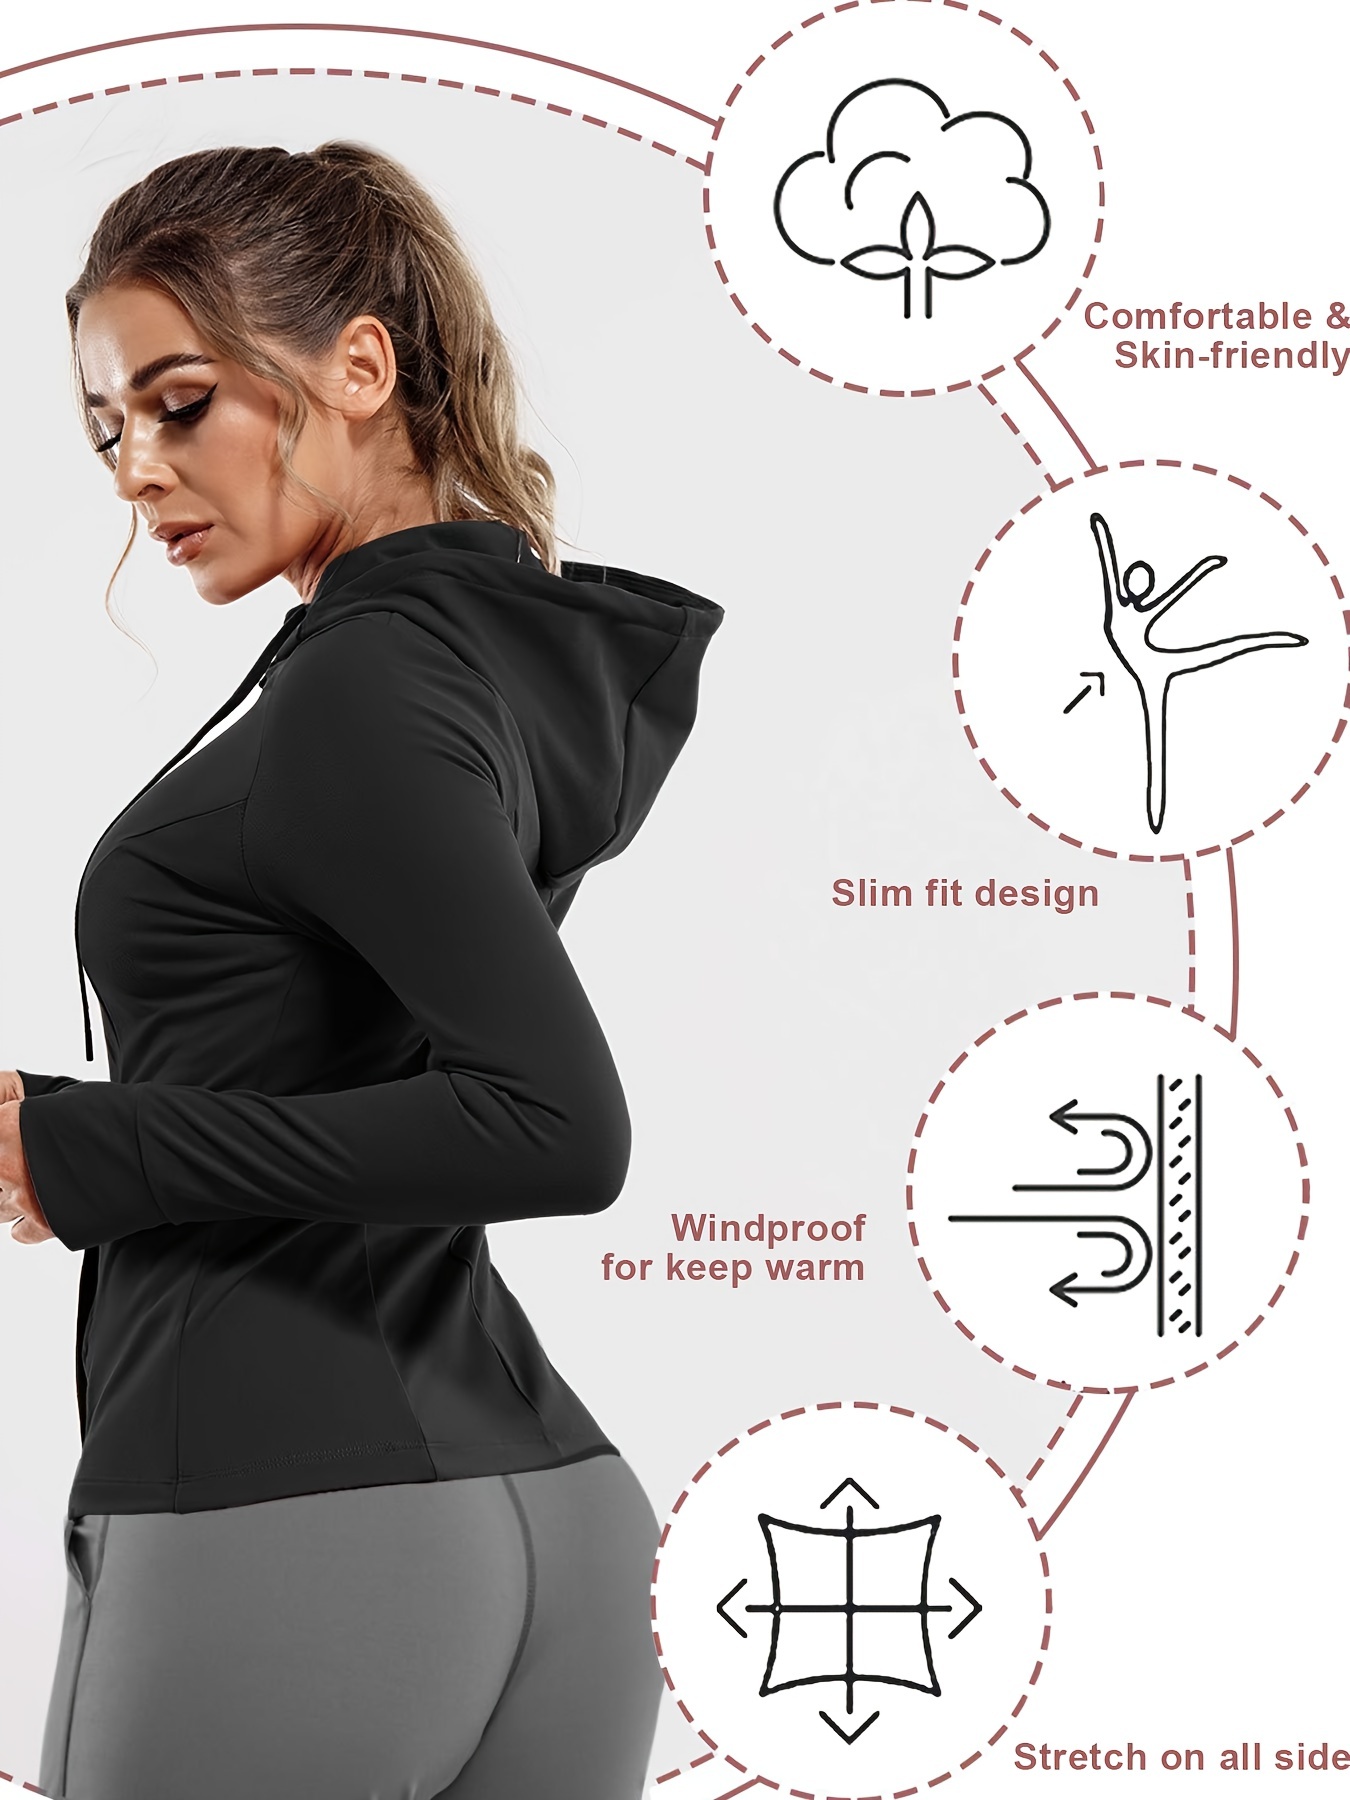 Buy Womens Cropped Jacket Zip Up Pullover Athletic Workout Slim Fit Yoga  Gym Outwear Long Sleeve Running Activewear Tops, White Sports Jacket, Small  at